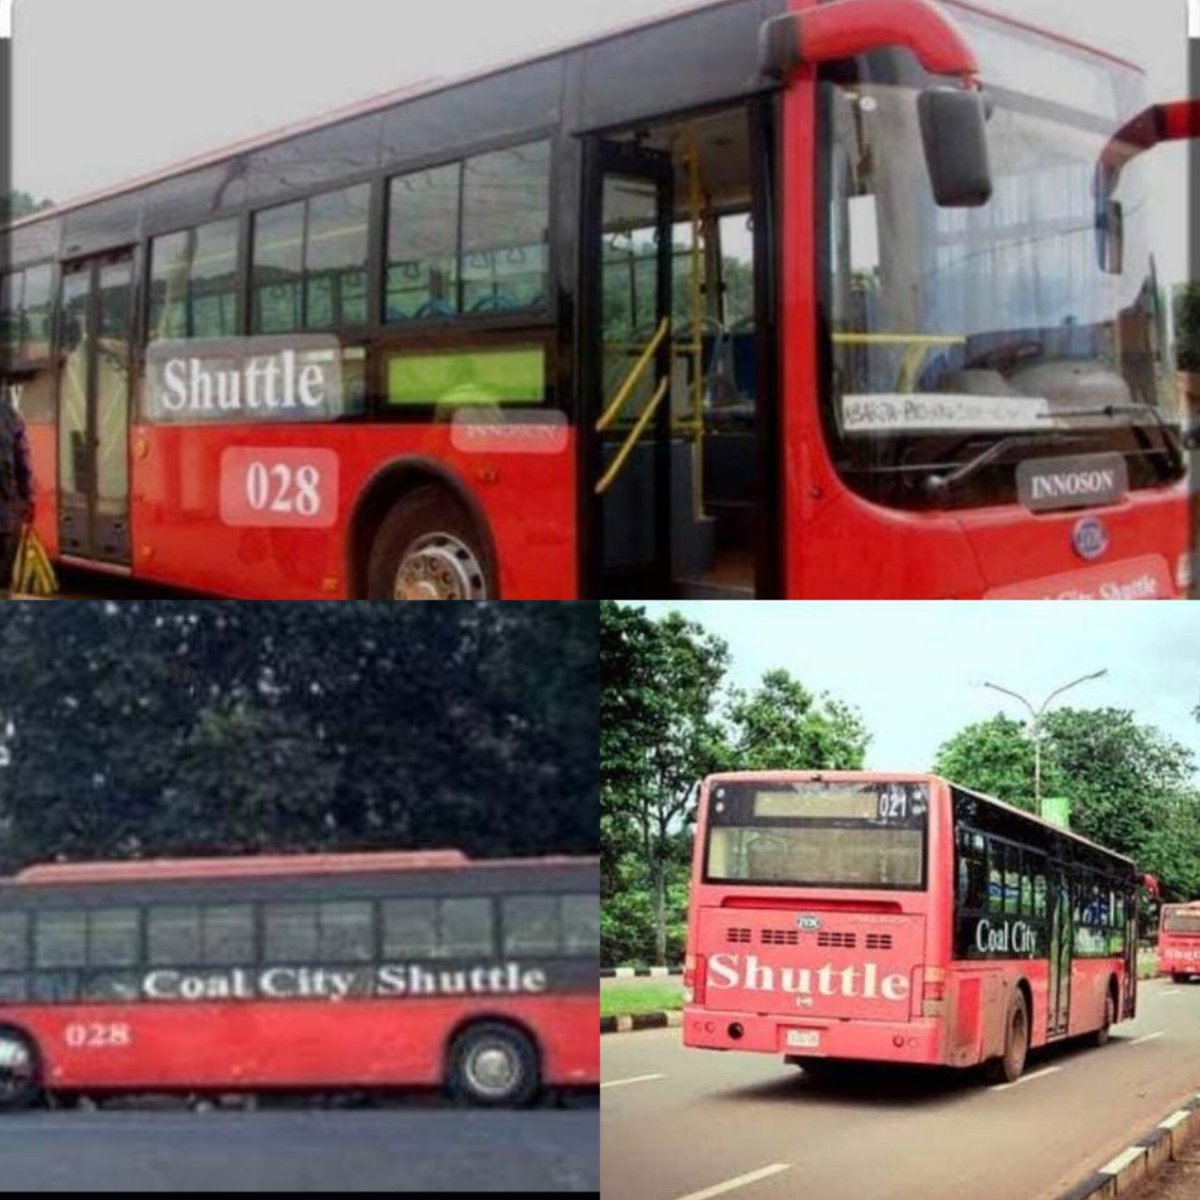 Once upon a time, Enugu had Taxi Sulli and Coal City shuttle😊

The Coal City Shuttle, which we all enjoyed and praised for being cheap and convenient, even offered free rides to school children in the mornings💛

Governance happened... the same governance they say is a continuum